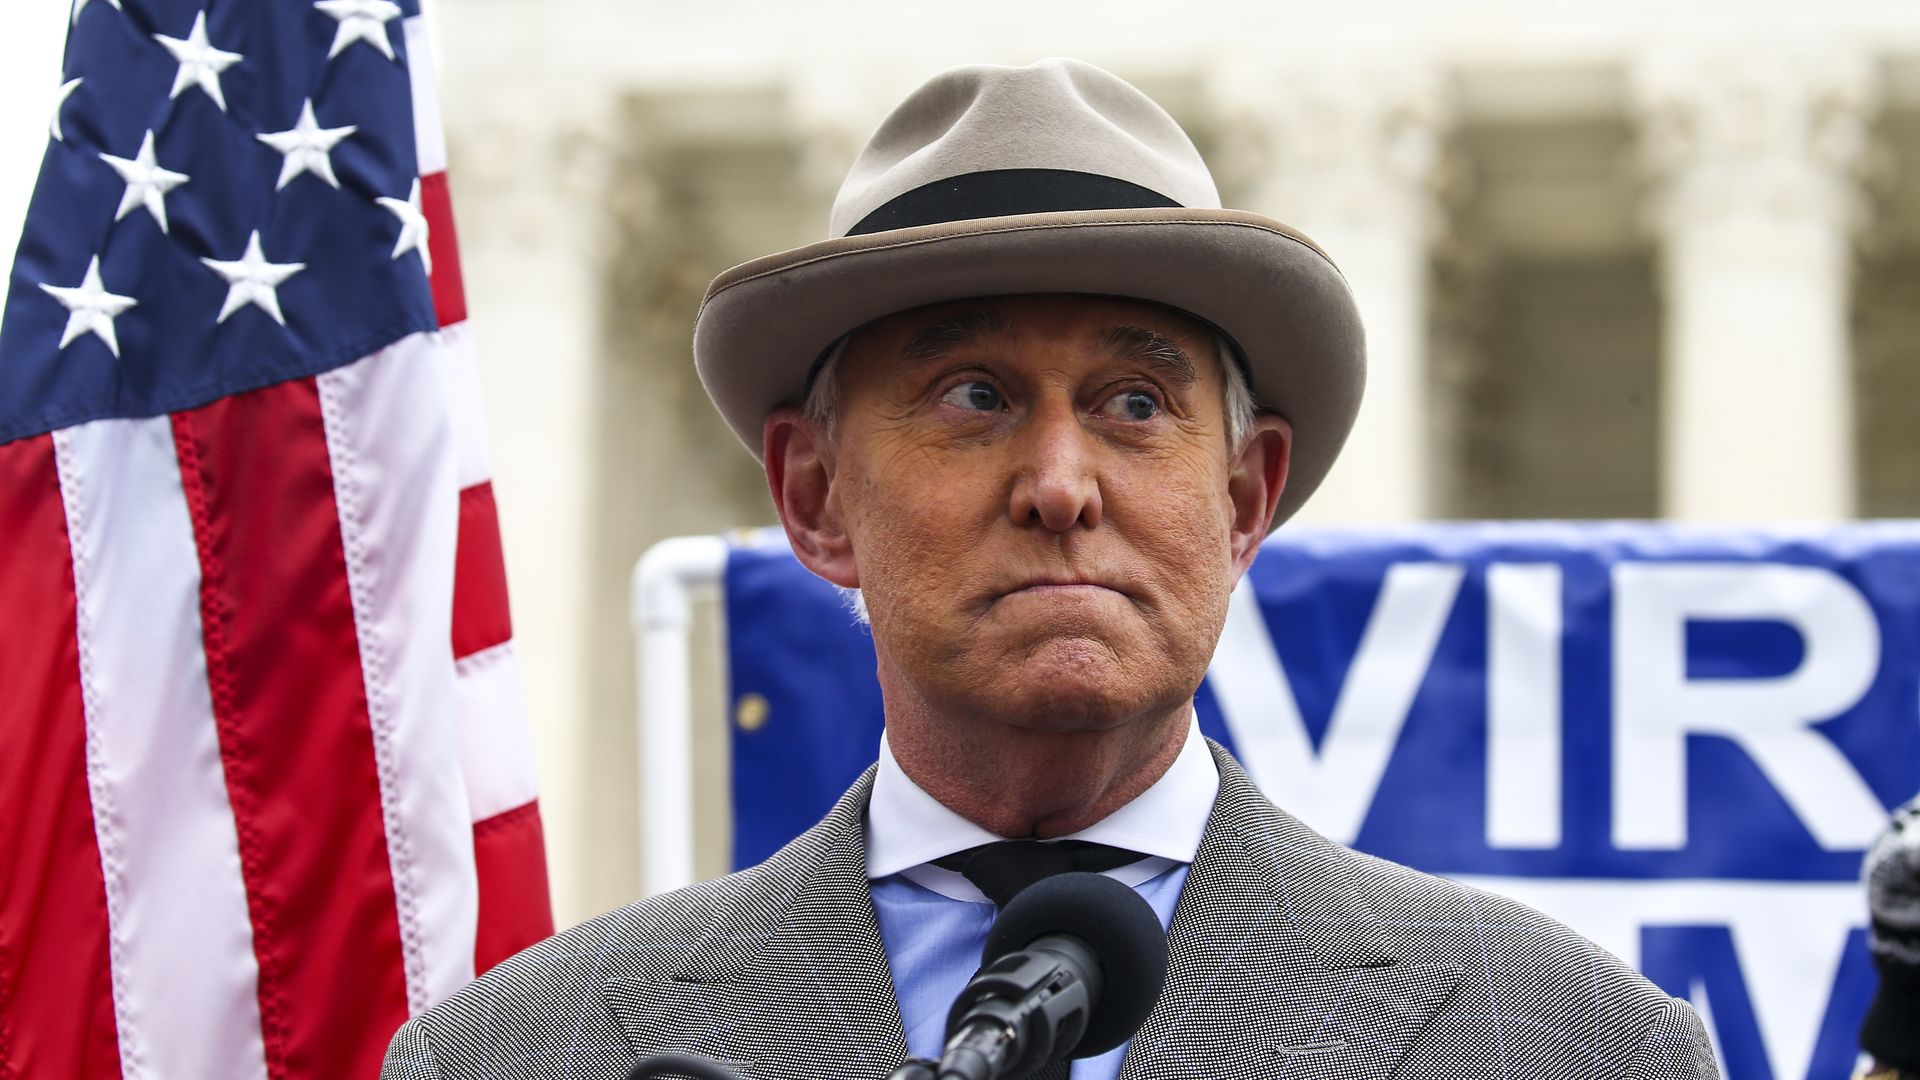  Roger Stone, former advisor to President Trump, speaks in front of the Supreme Court on January 05, 2021 in Washington, DC. 